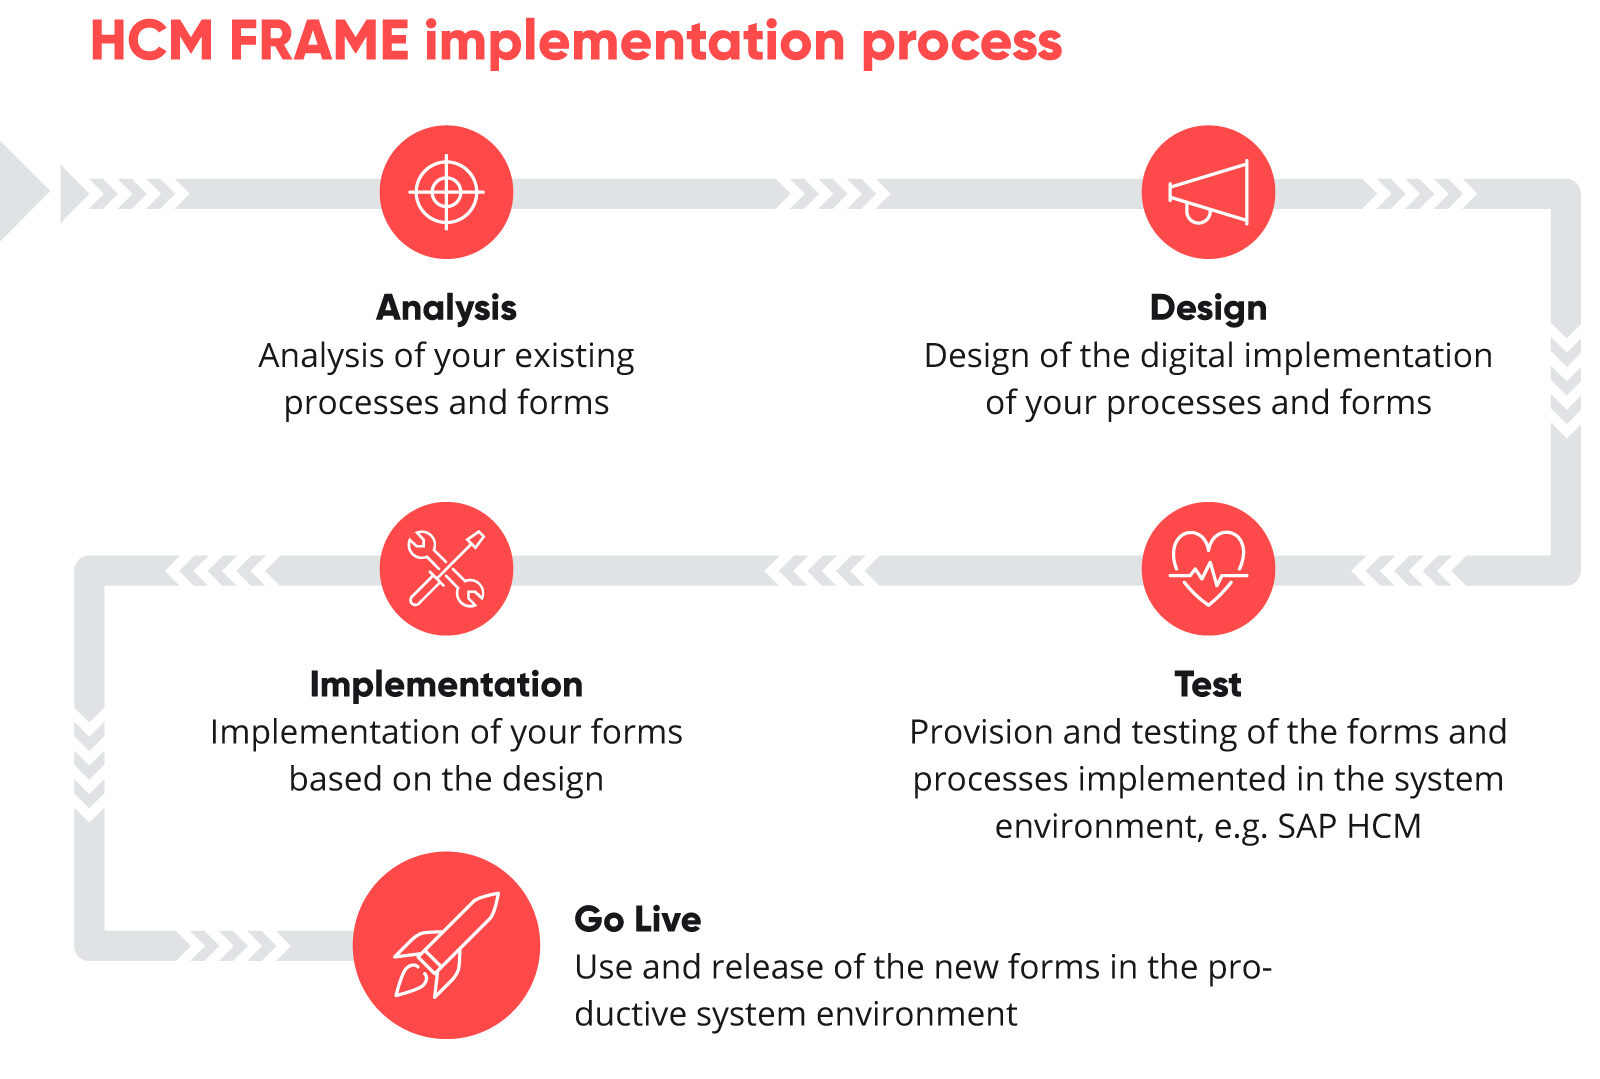 Picture of the HCM Frame implementation process valantic